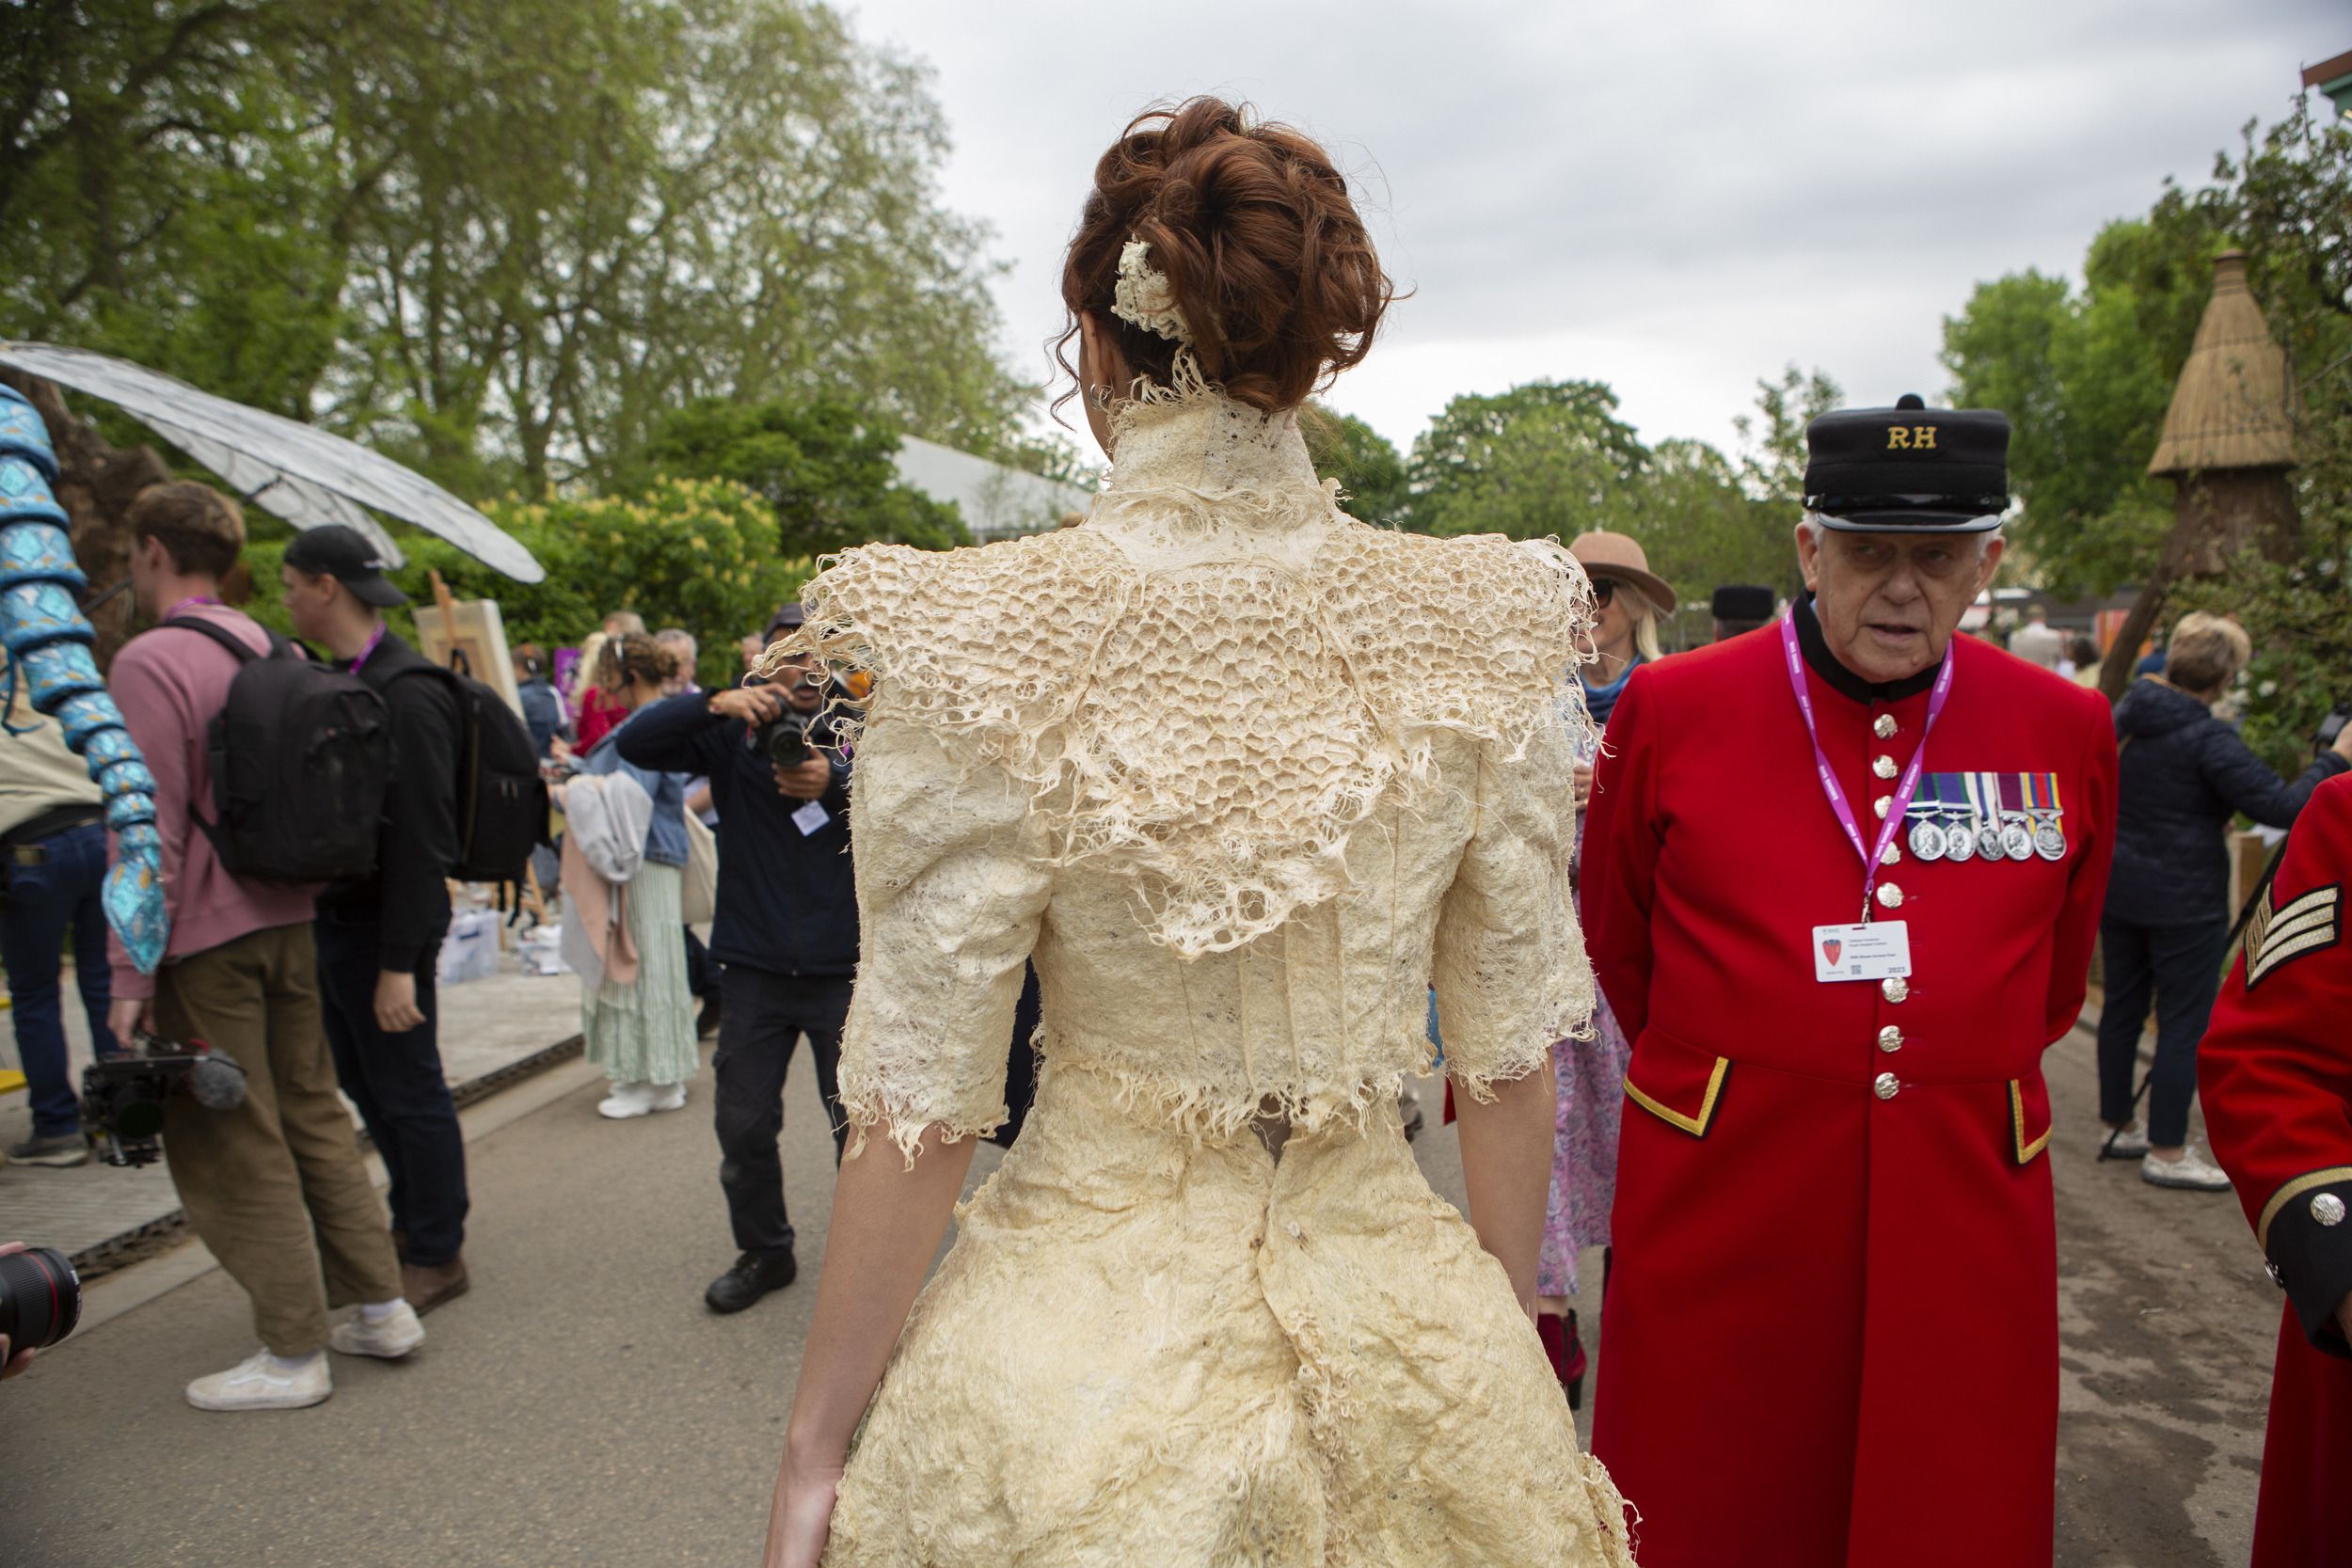 Eco-conscious biodegradable wedding dress at Chelsea Flower Show